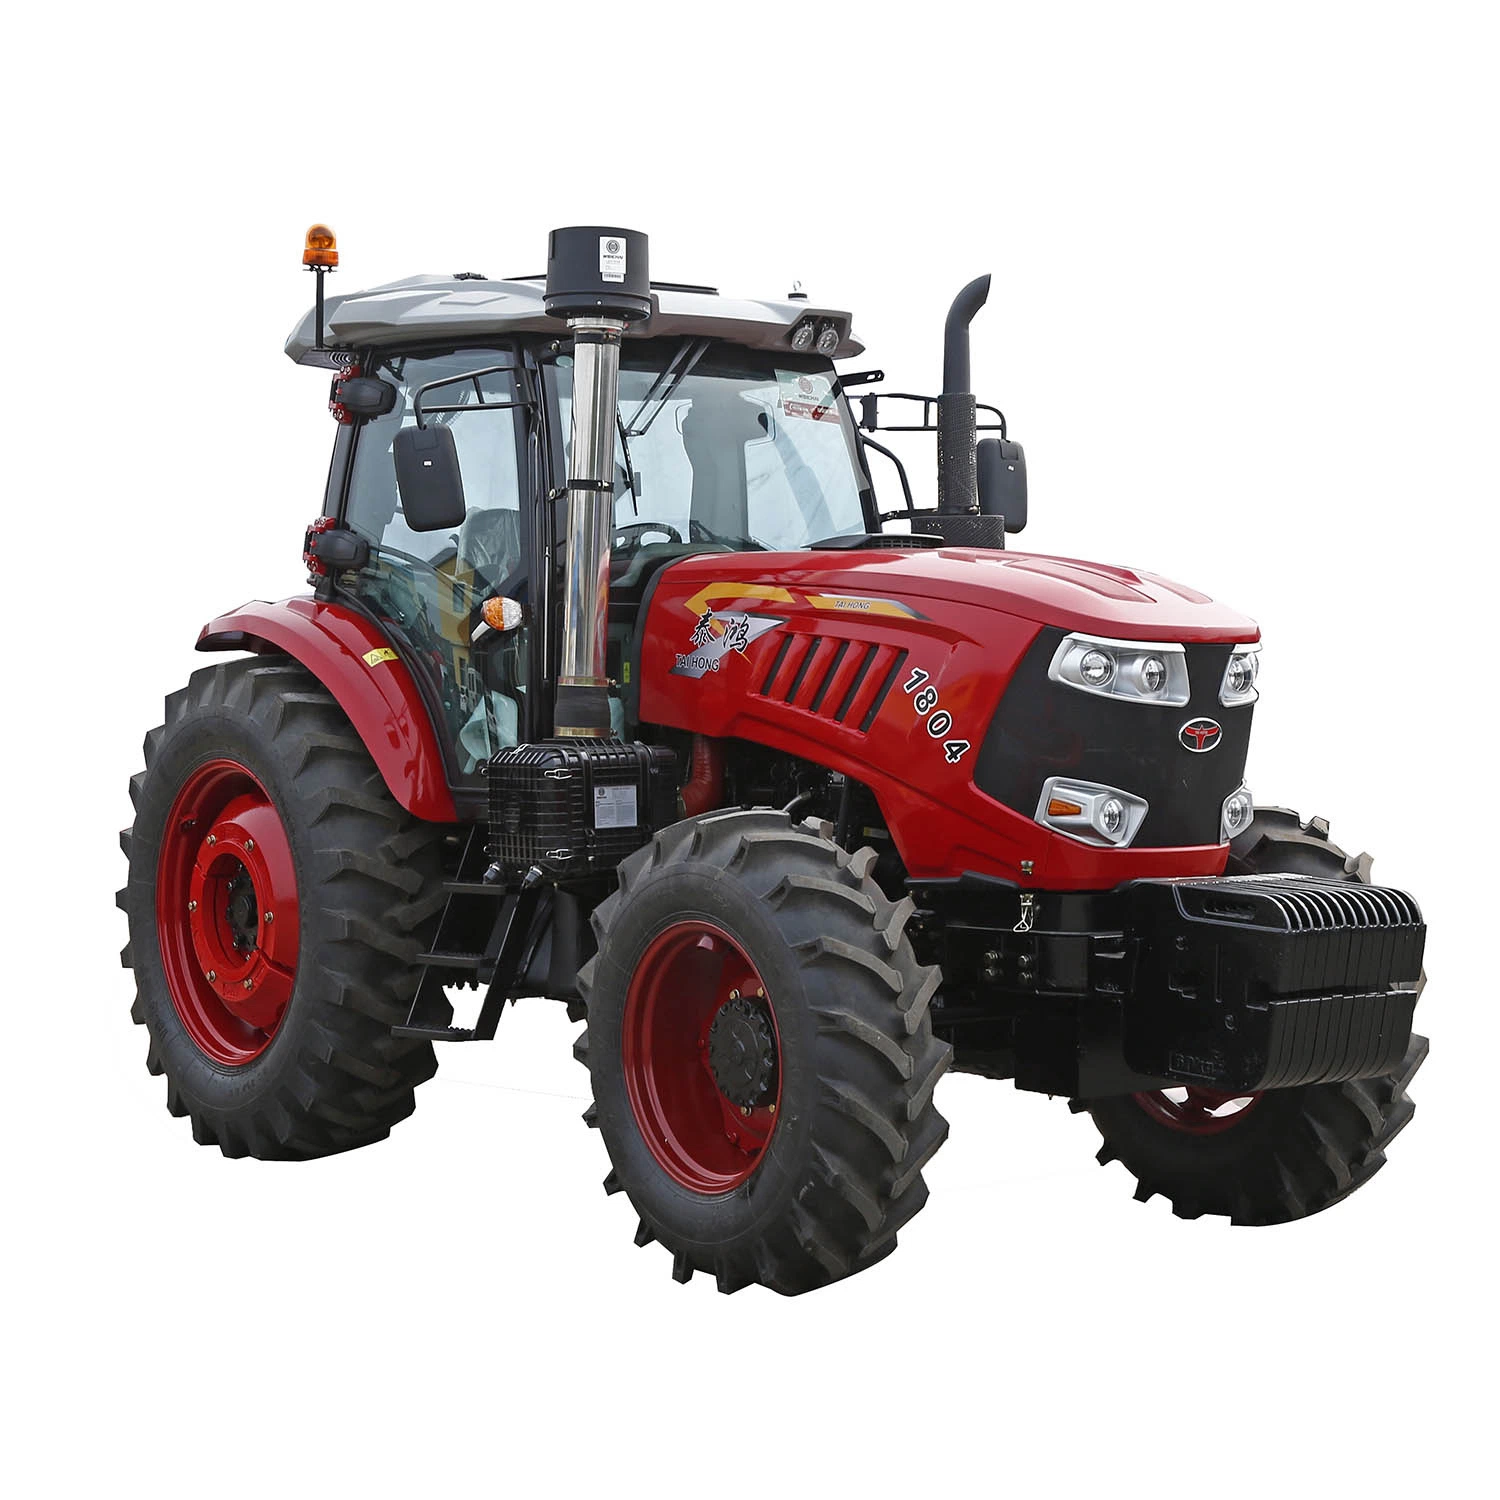 China Manufacture Farm Tractor 180HP 4WD Tractor for Farming and Agricultural Work